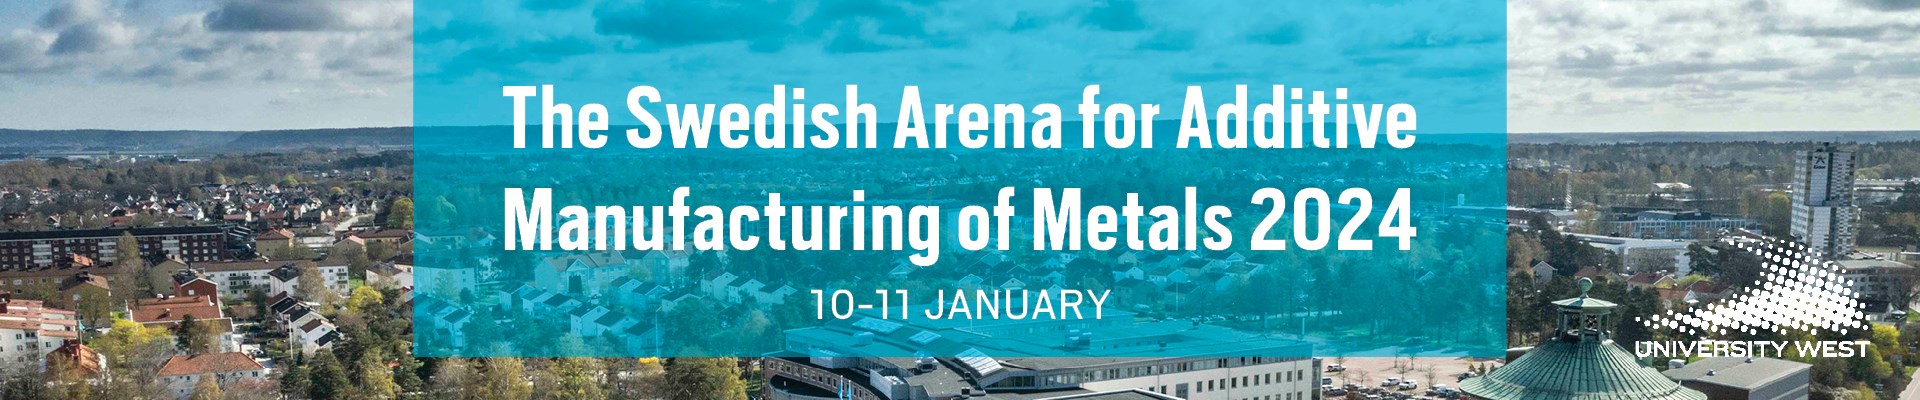 The Swedish Arena for Additive Manufacturing of Metals 2024